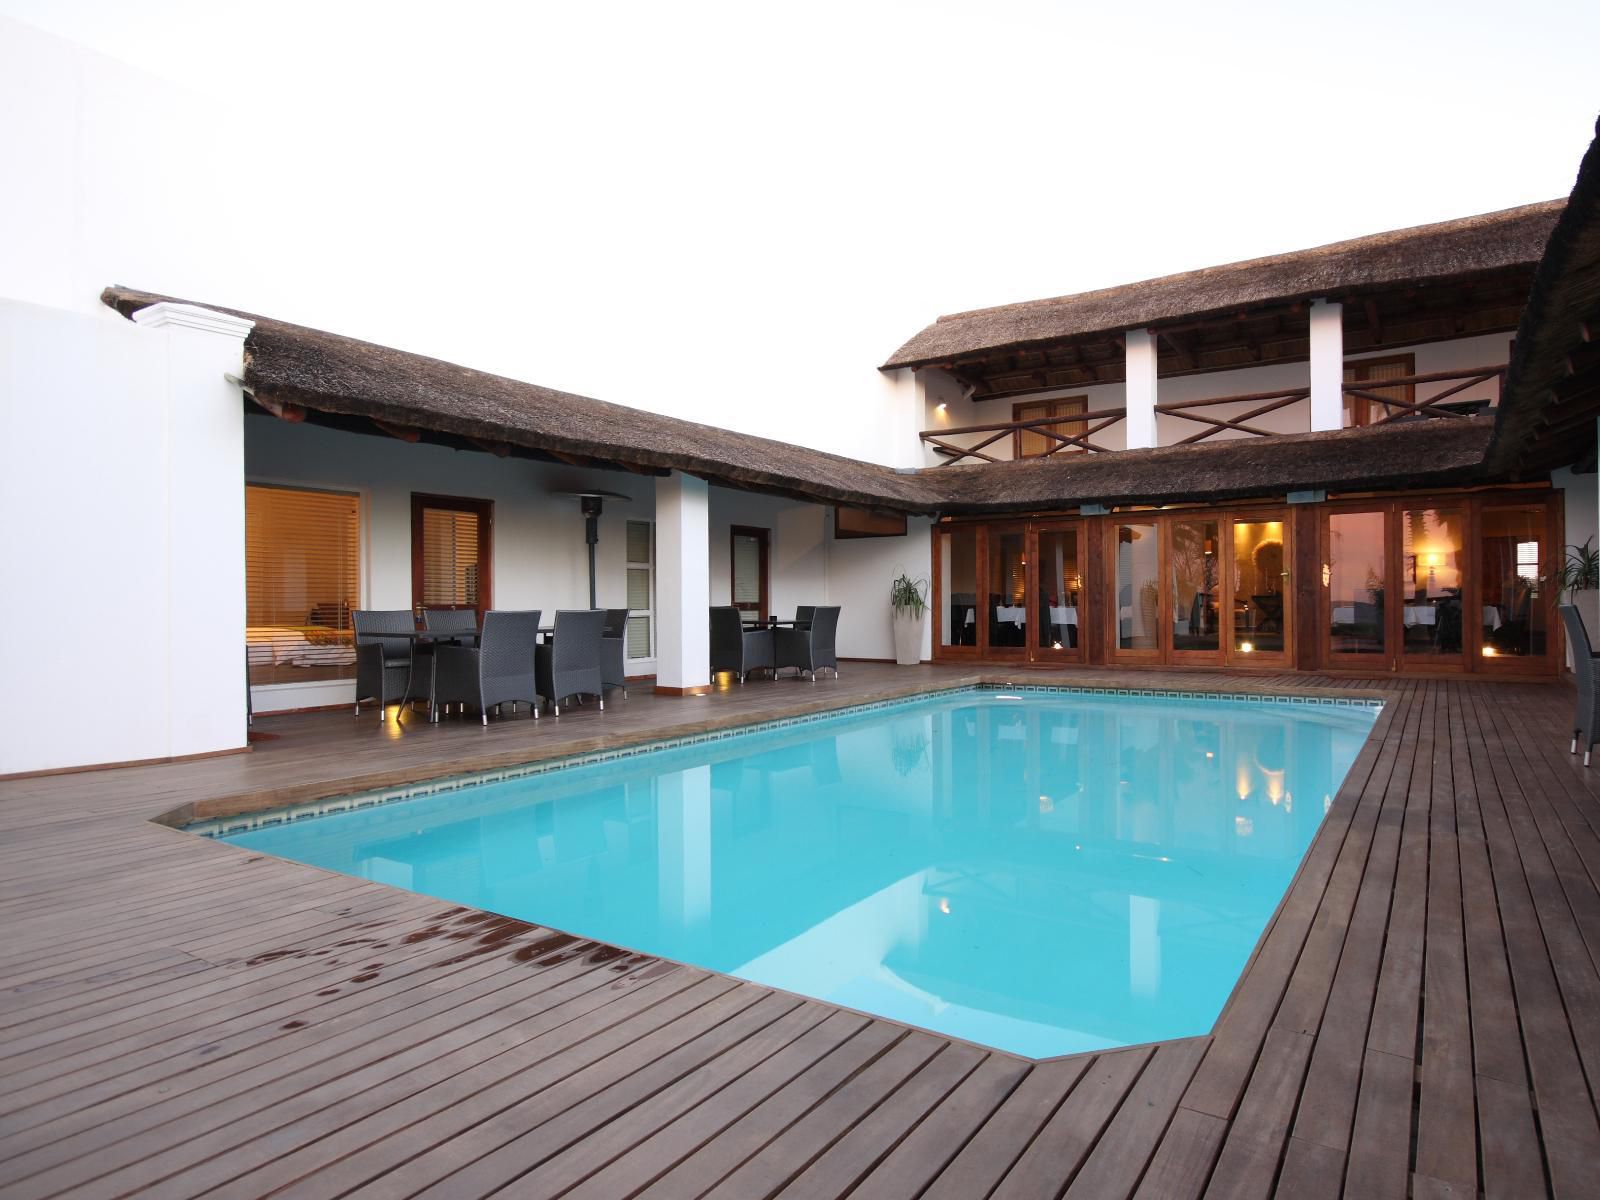 Dundi Lodge Augrabies Falls Augrabies Northern Cape South Africa House, Building, Architecture, Swimming Pool